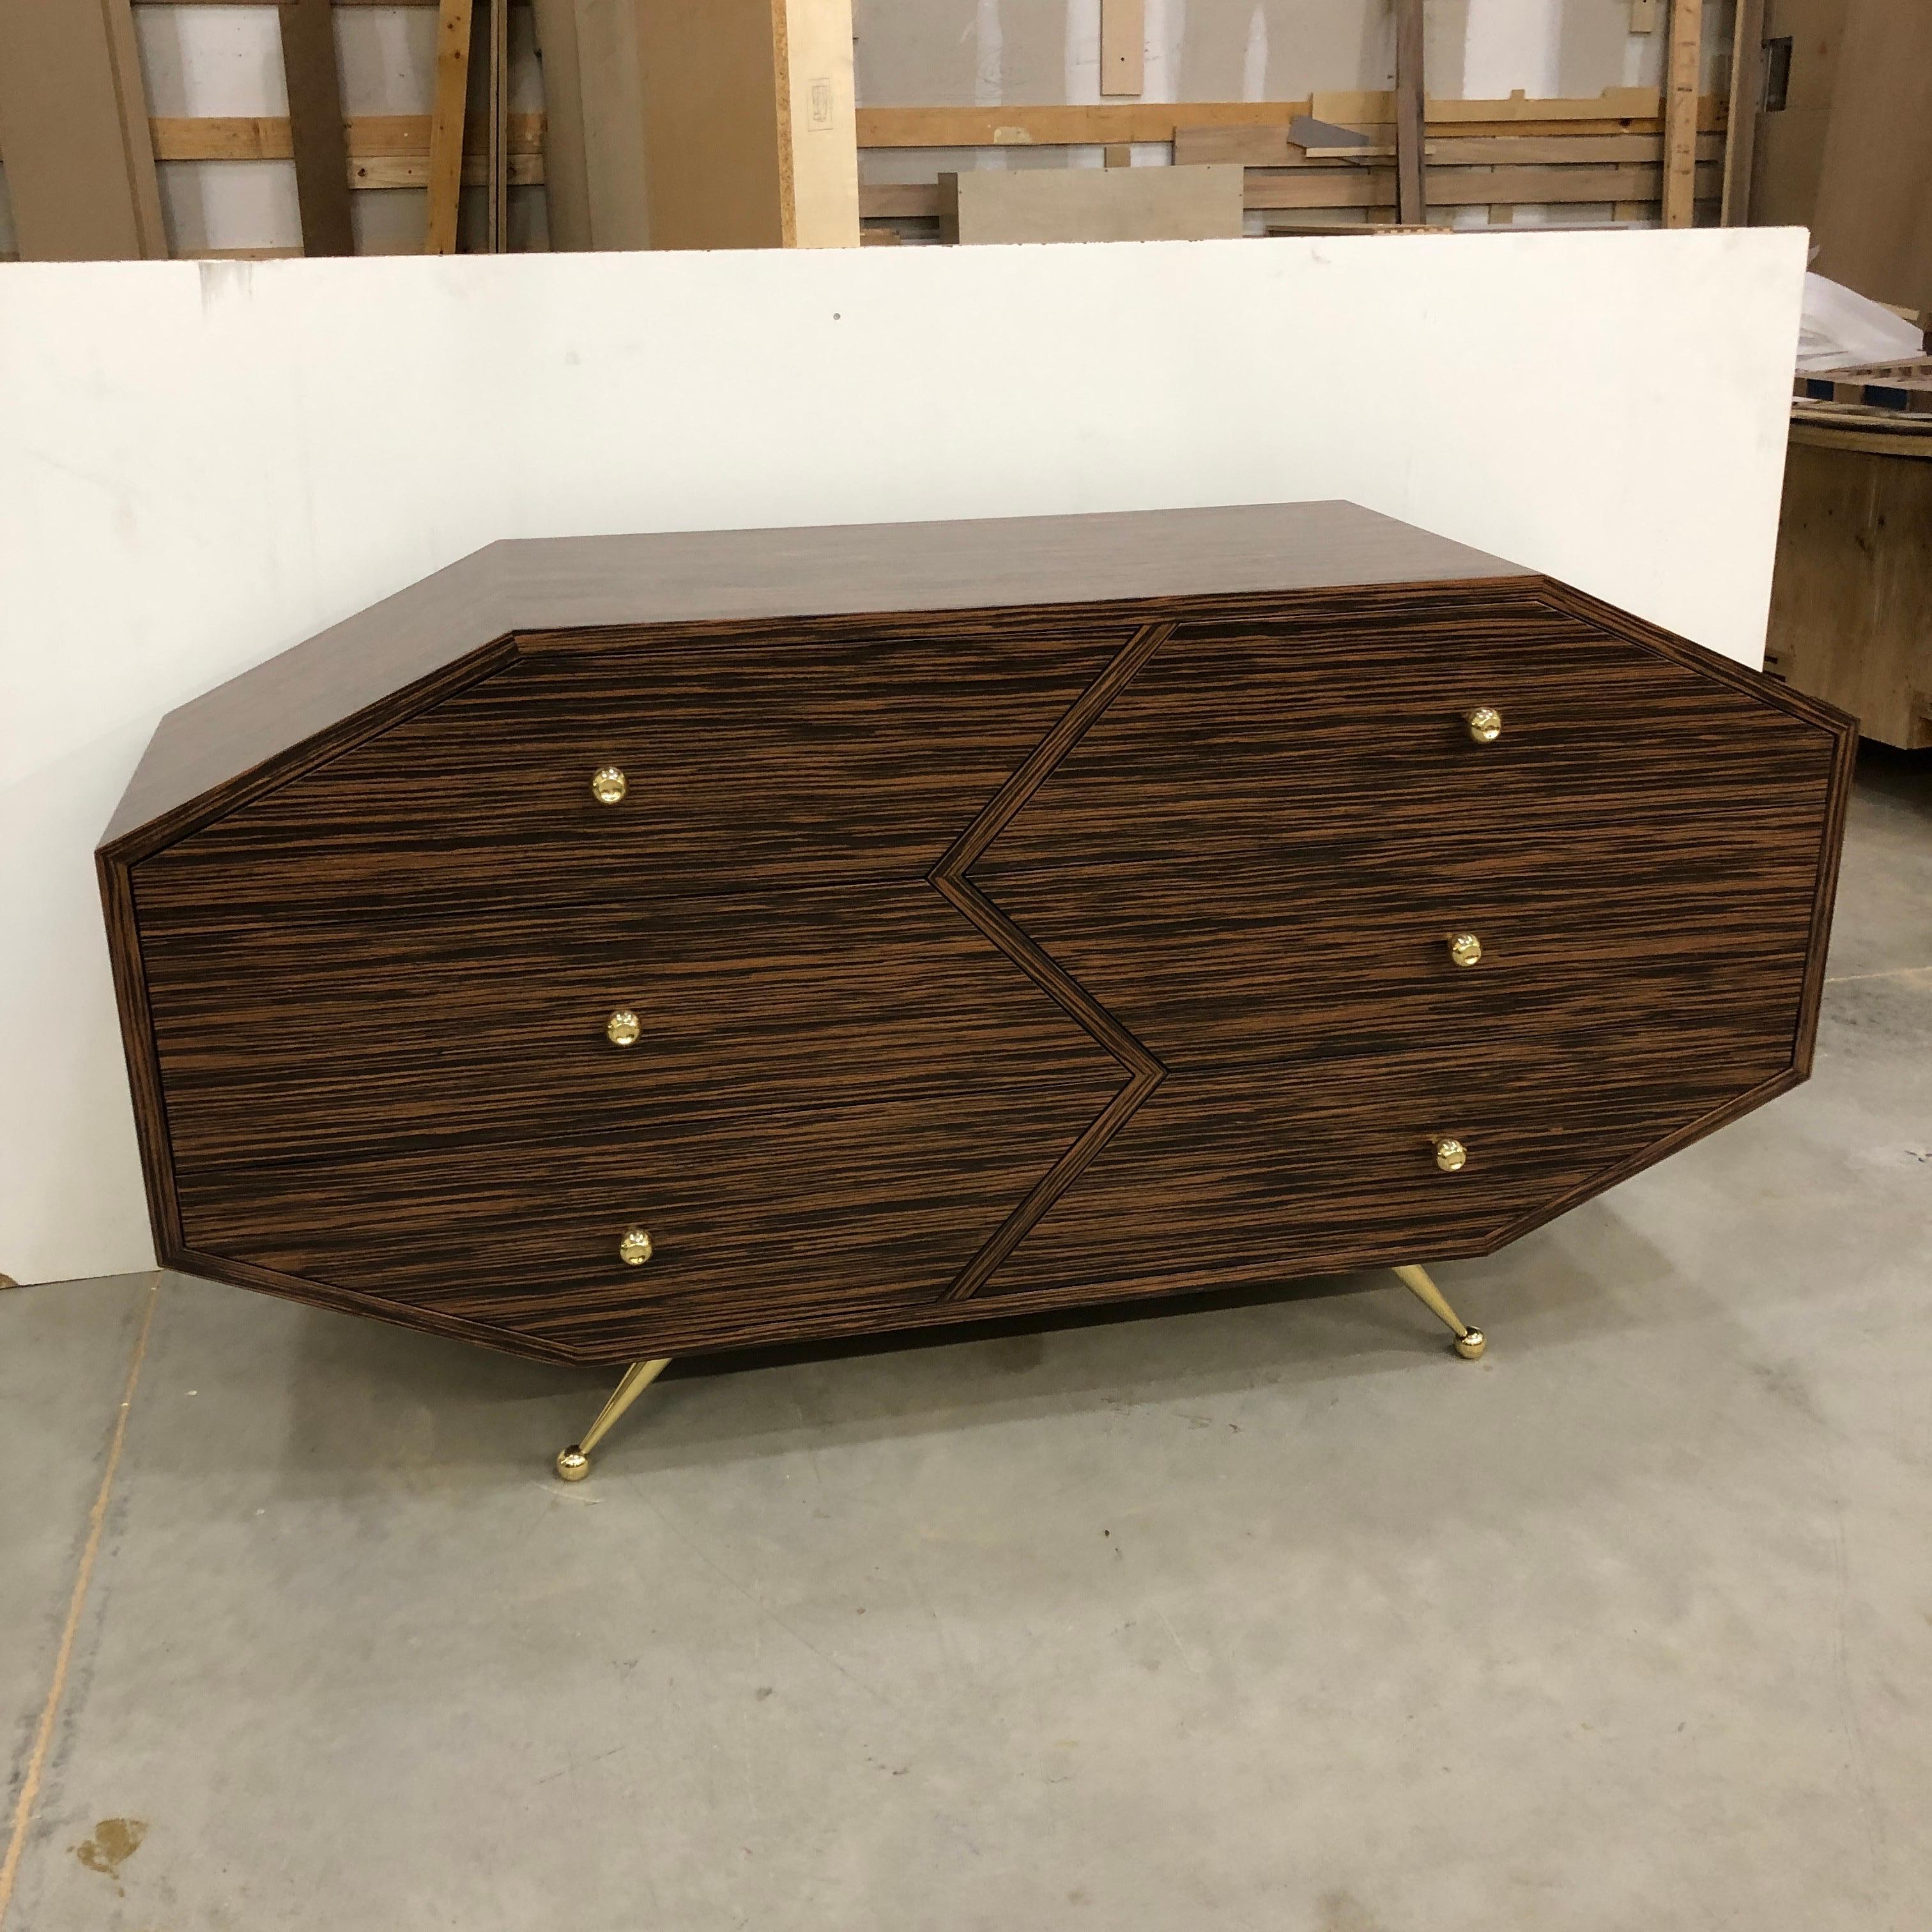 The BB10 sideboard/dresser has an Art Deco feel with a contemporary touch and is designed and hand-built by Troy Smith Studio. 

The exterior is veneered in Macassar Ebony and finished in a clear satin coat. All hardware, including feet and knobs,